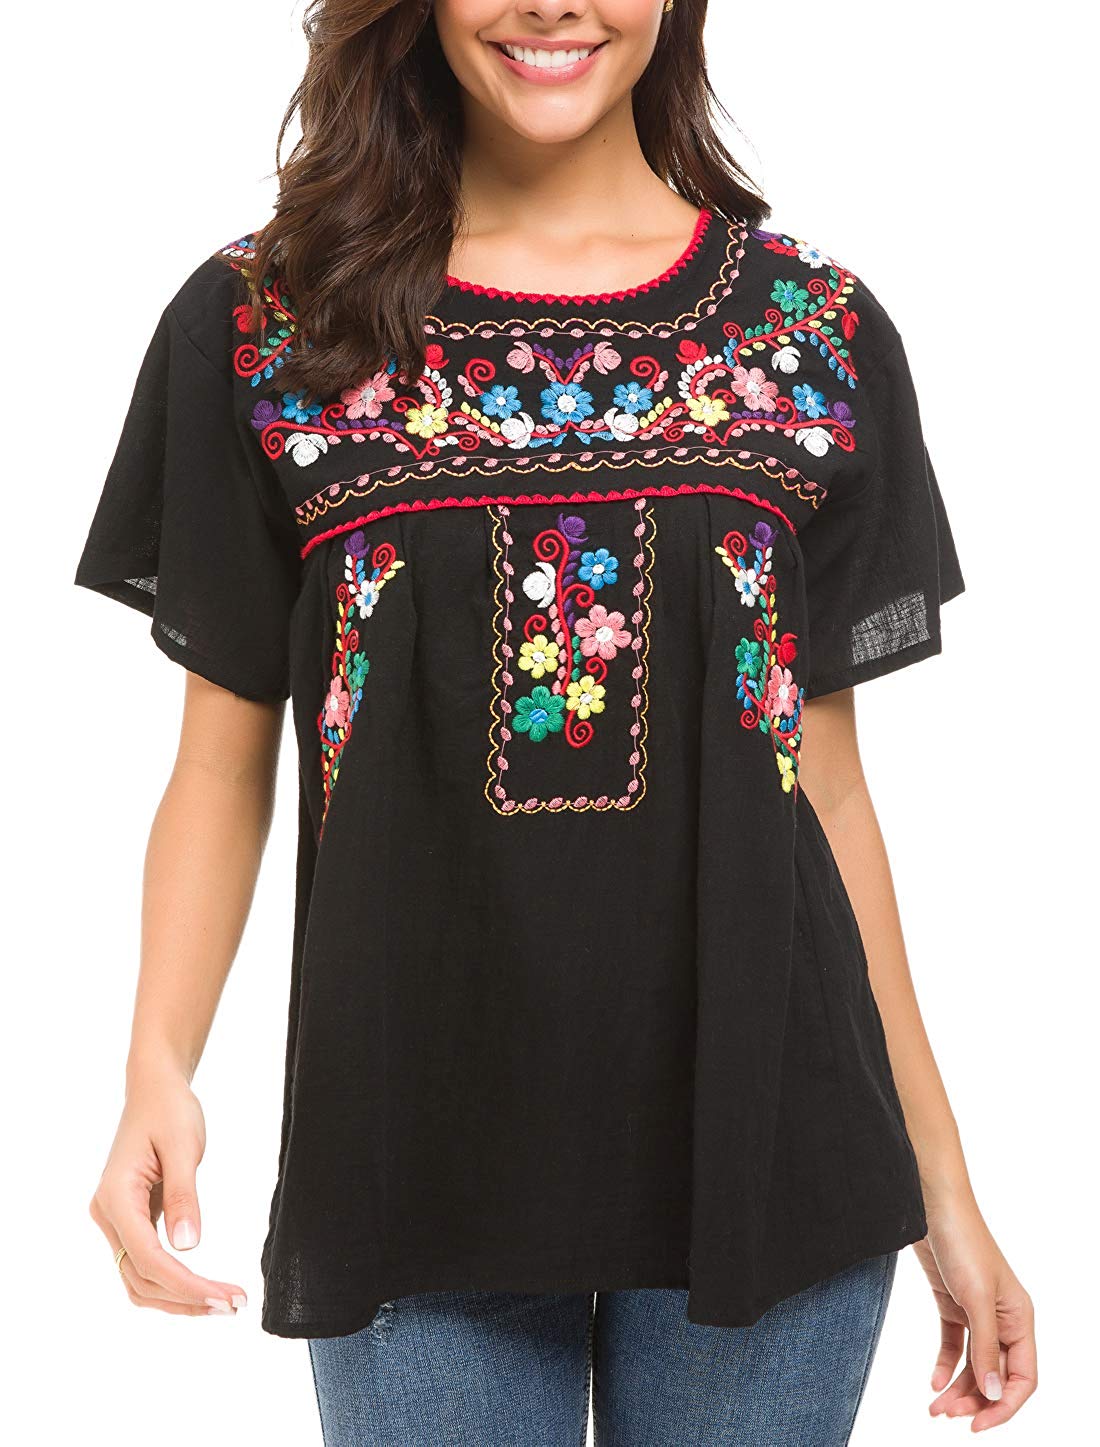 YZXDORWJ Women's Embroidered Mexican Peasant Blouse (XL,, Black69, Size ...